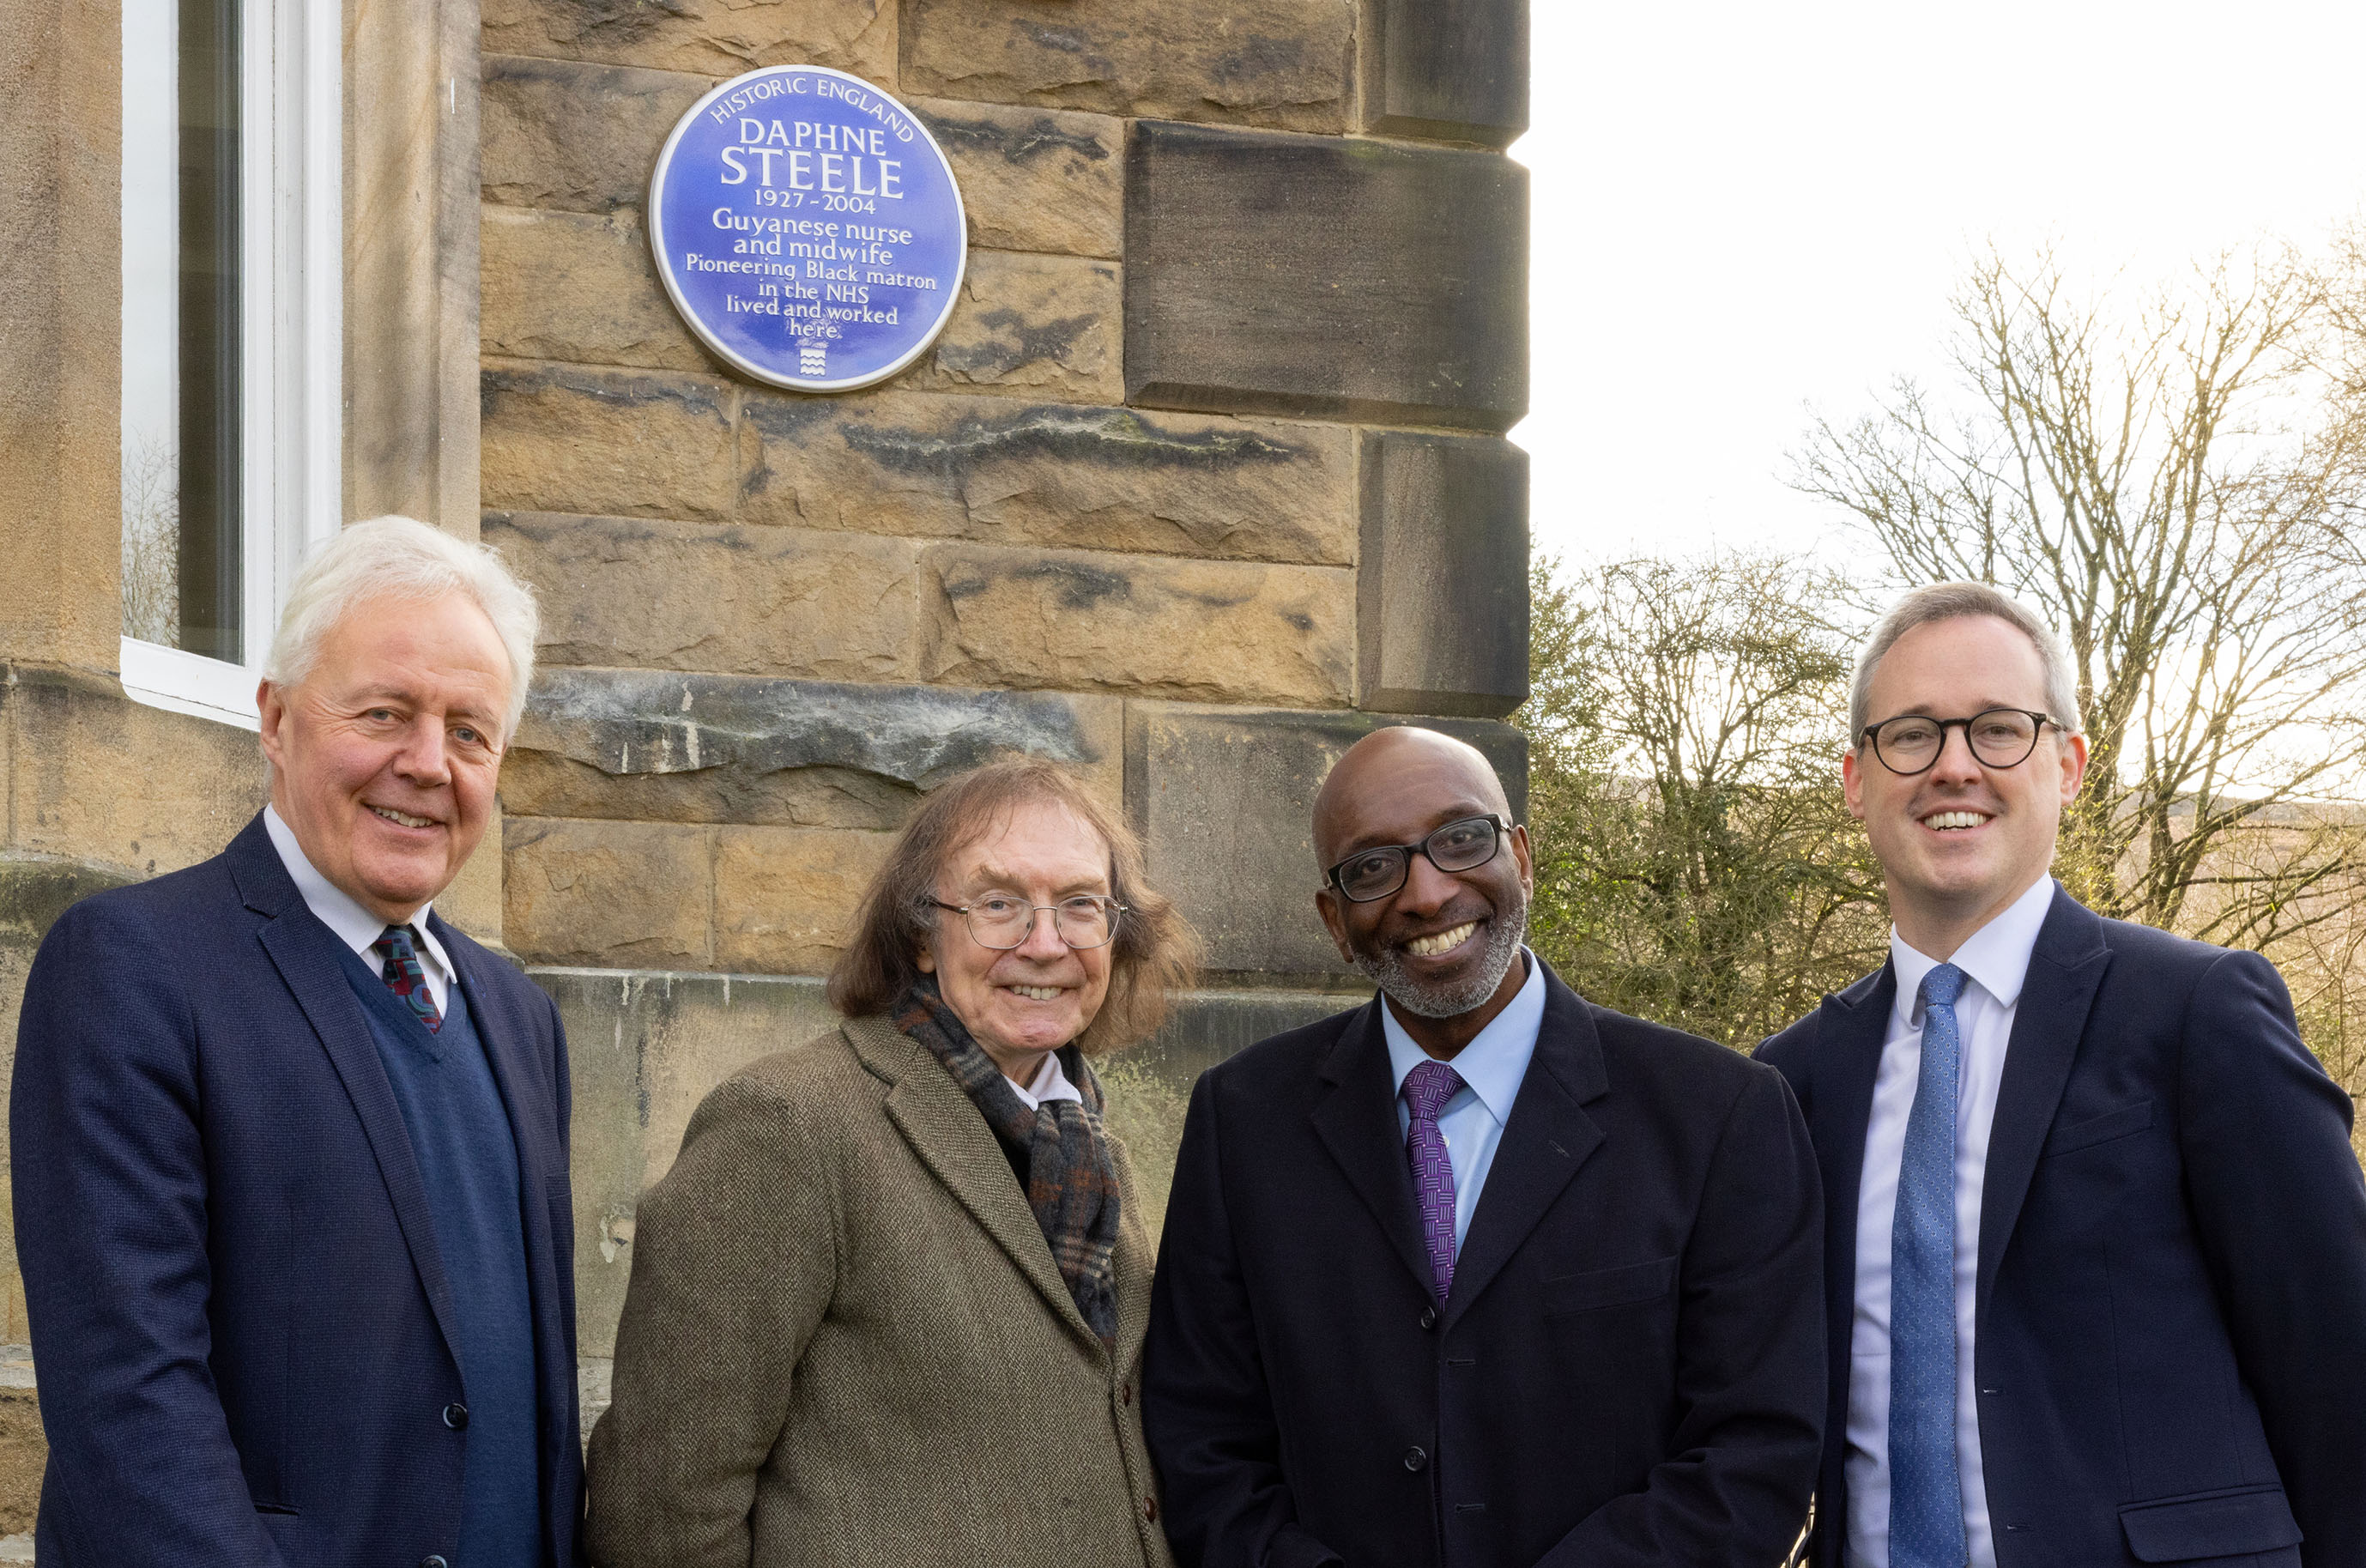 Four men in suits and coats stood smiling for the camera in the foreground, underneath a heritage blue plaque on a wall in the background.